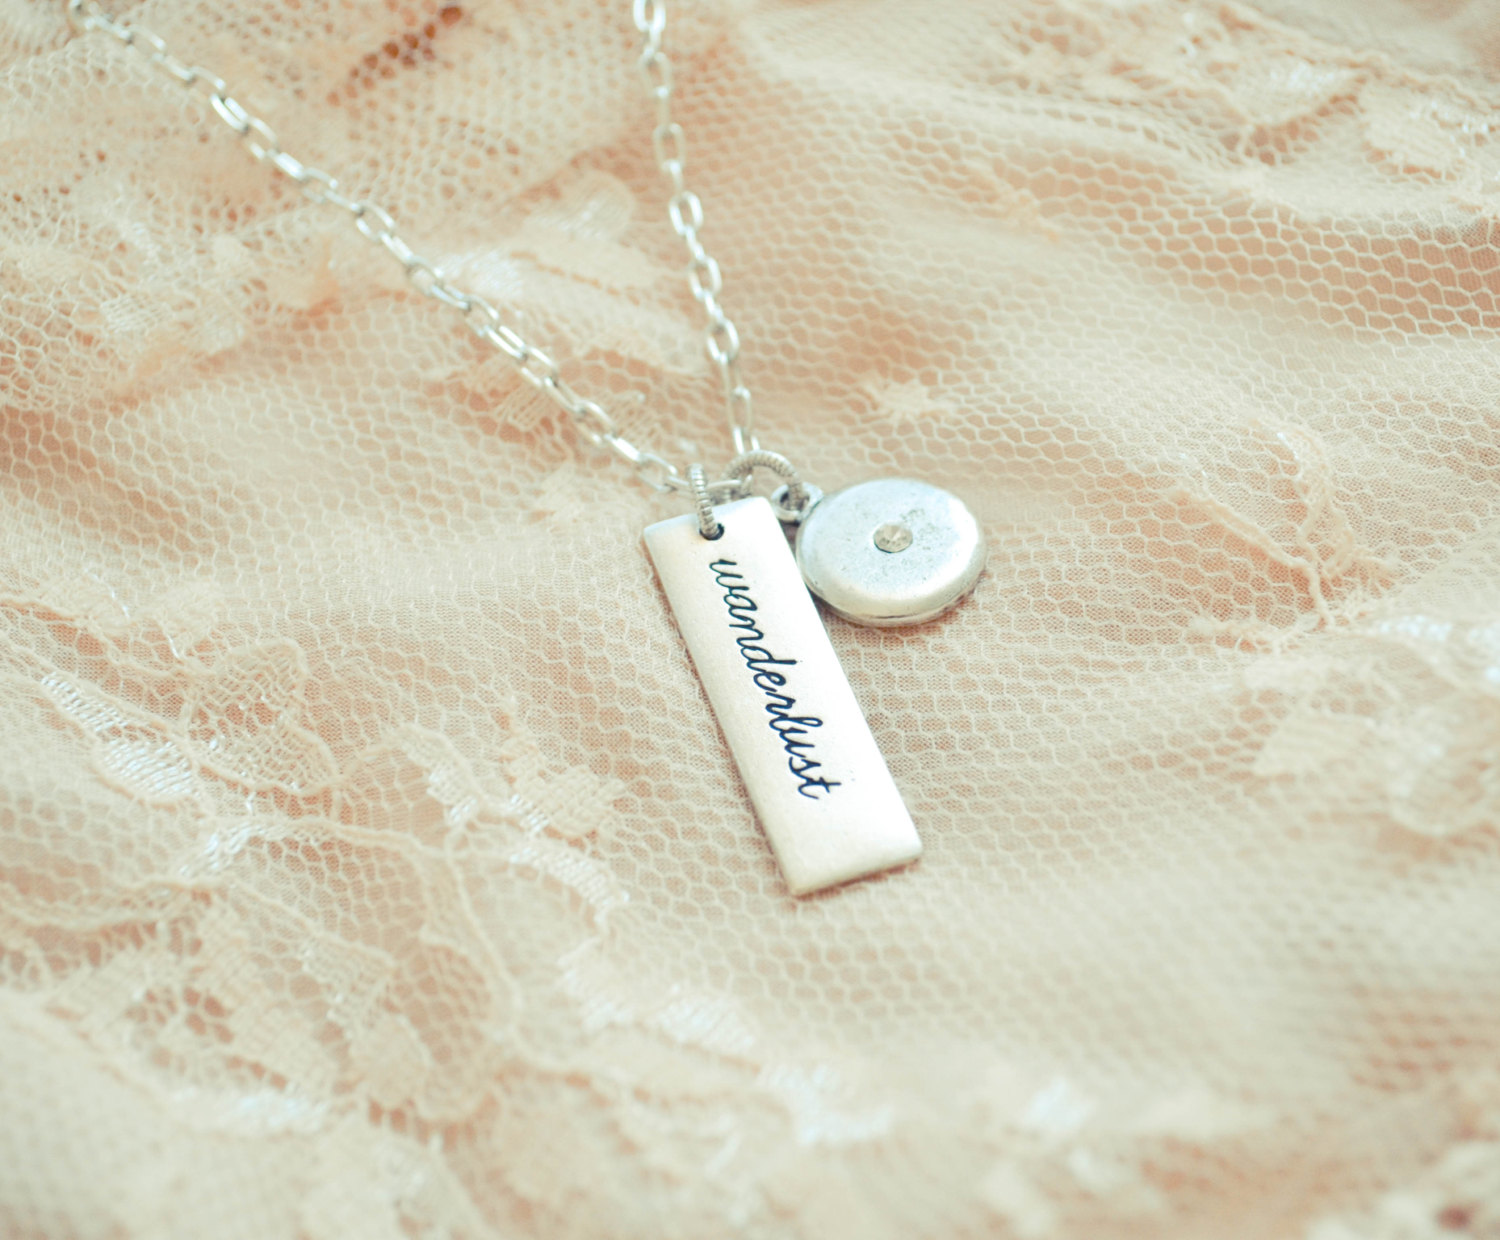 wanderlust necklace with heart | gifts bridesmaids travel | https://emmalinebride.com/gifts/gifts-bridesmaids-travel